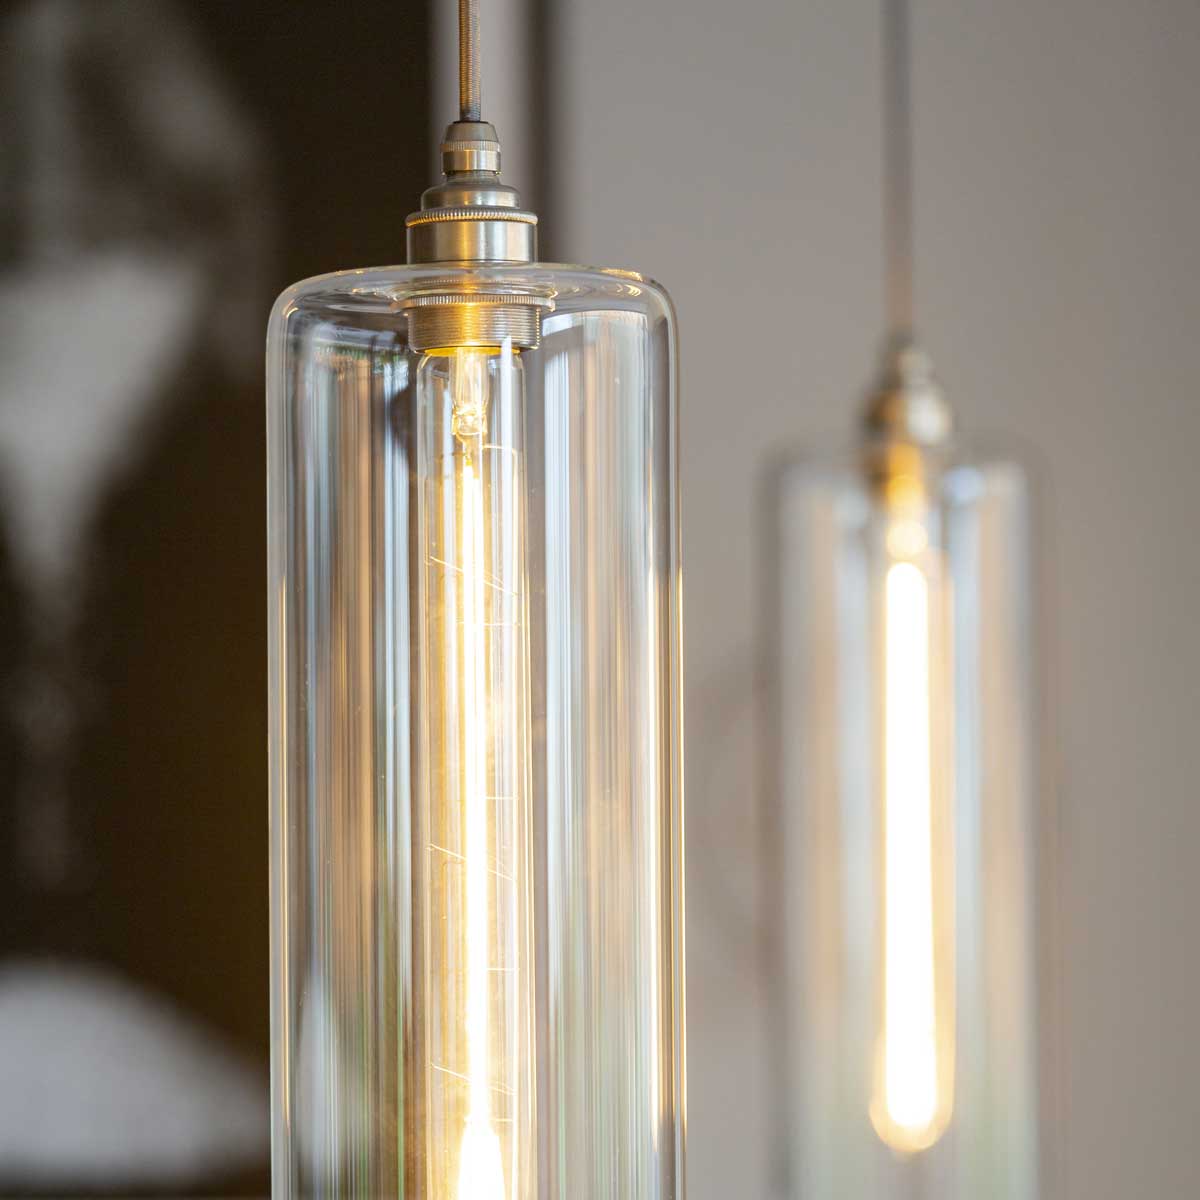 Piccadilly hand-blown glass pendant light for homes and commercial premises